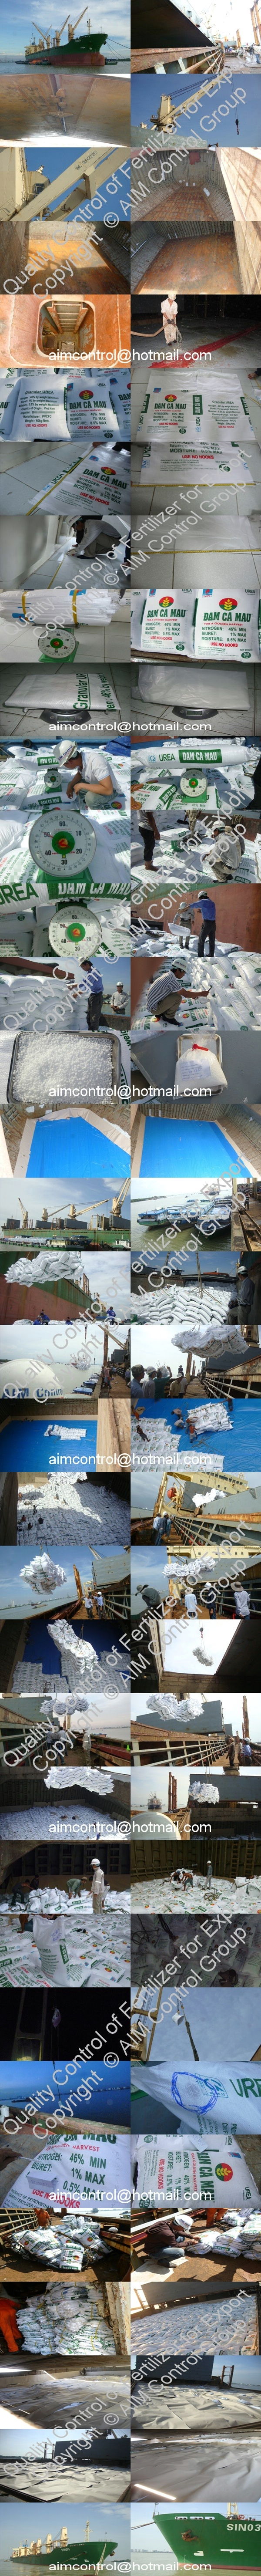 Loading_inspection_discharging_surveillance_and_tallying_services_for_fertilizer_AIM_Control